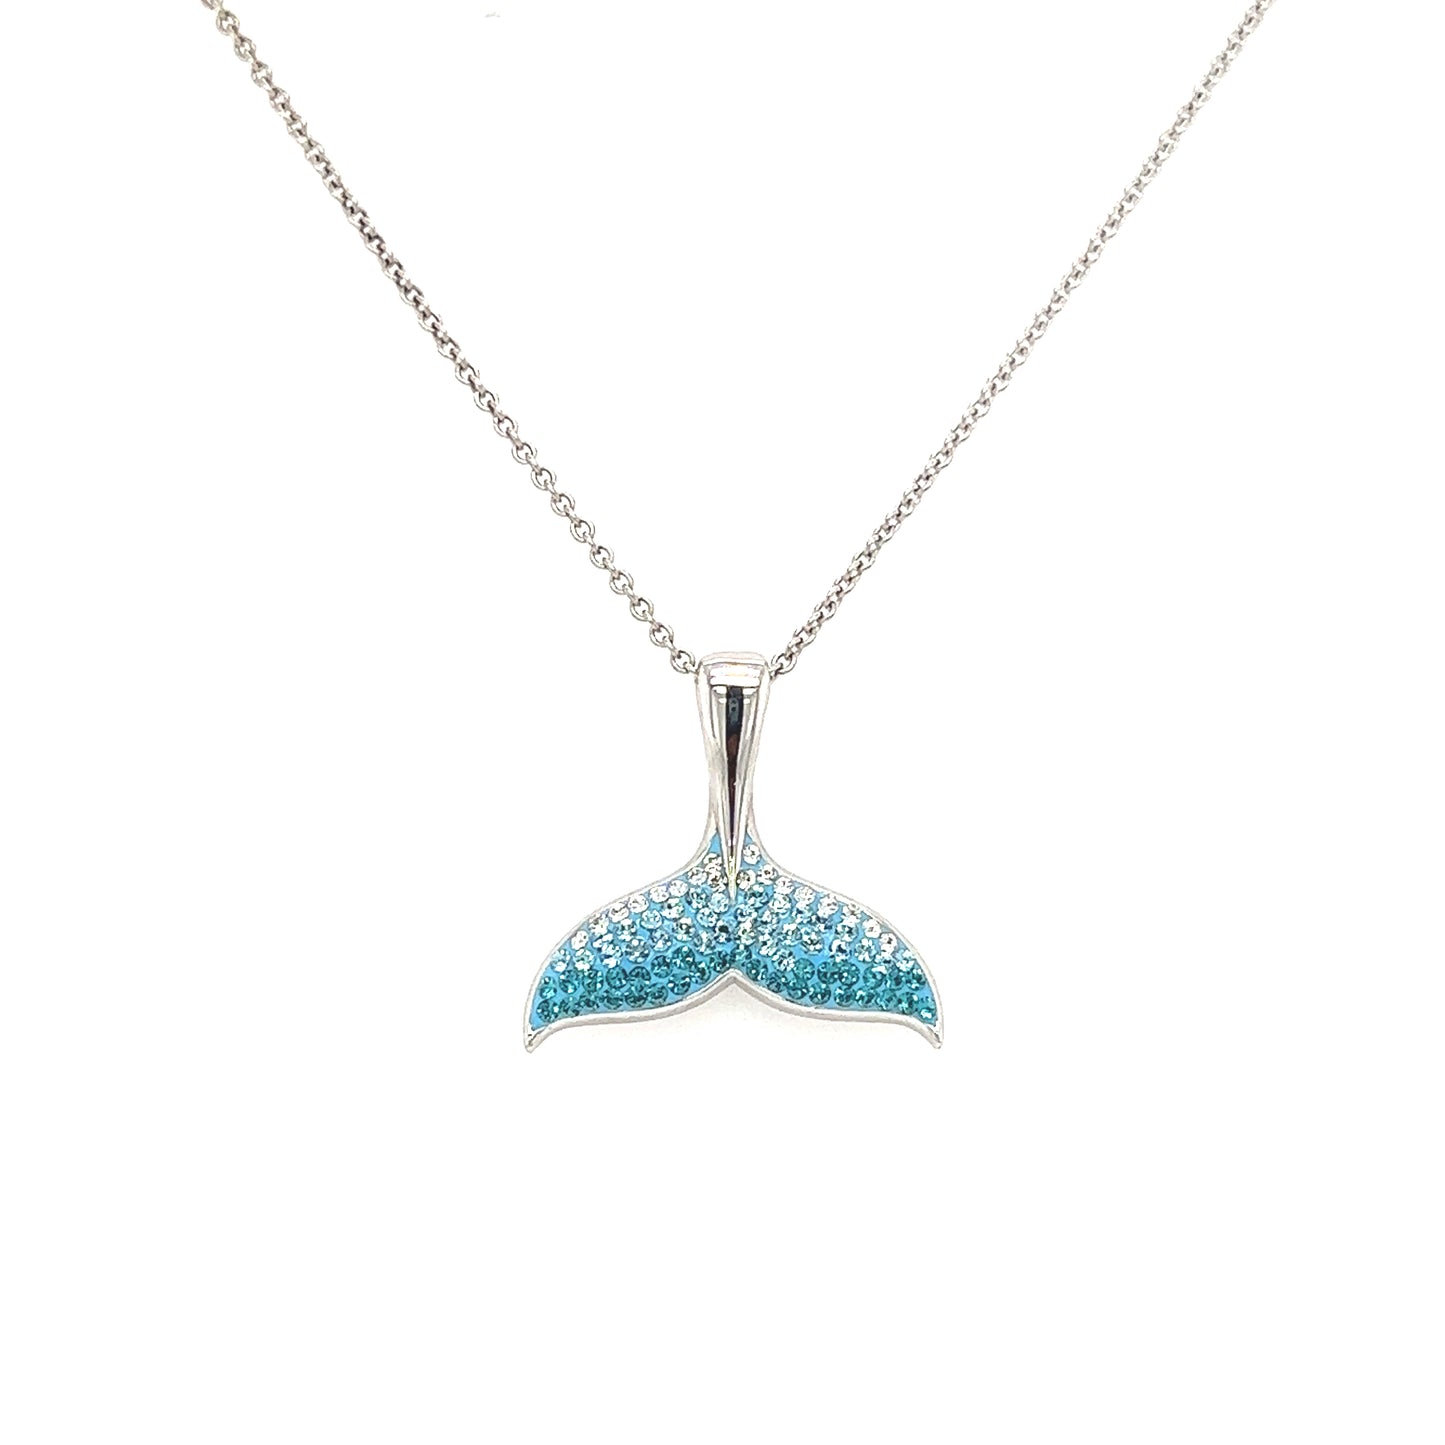 Whale Tail Necklace with Aqua Crystals in Sterling Silver Front View